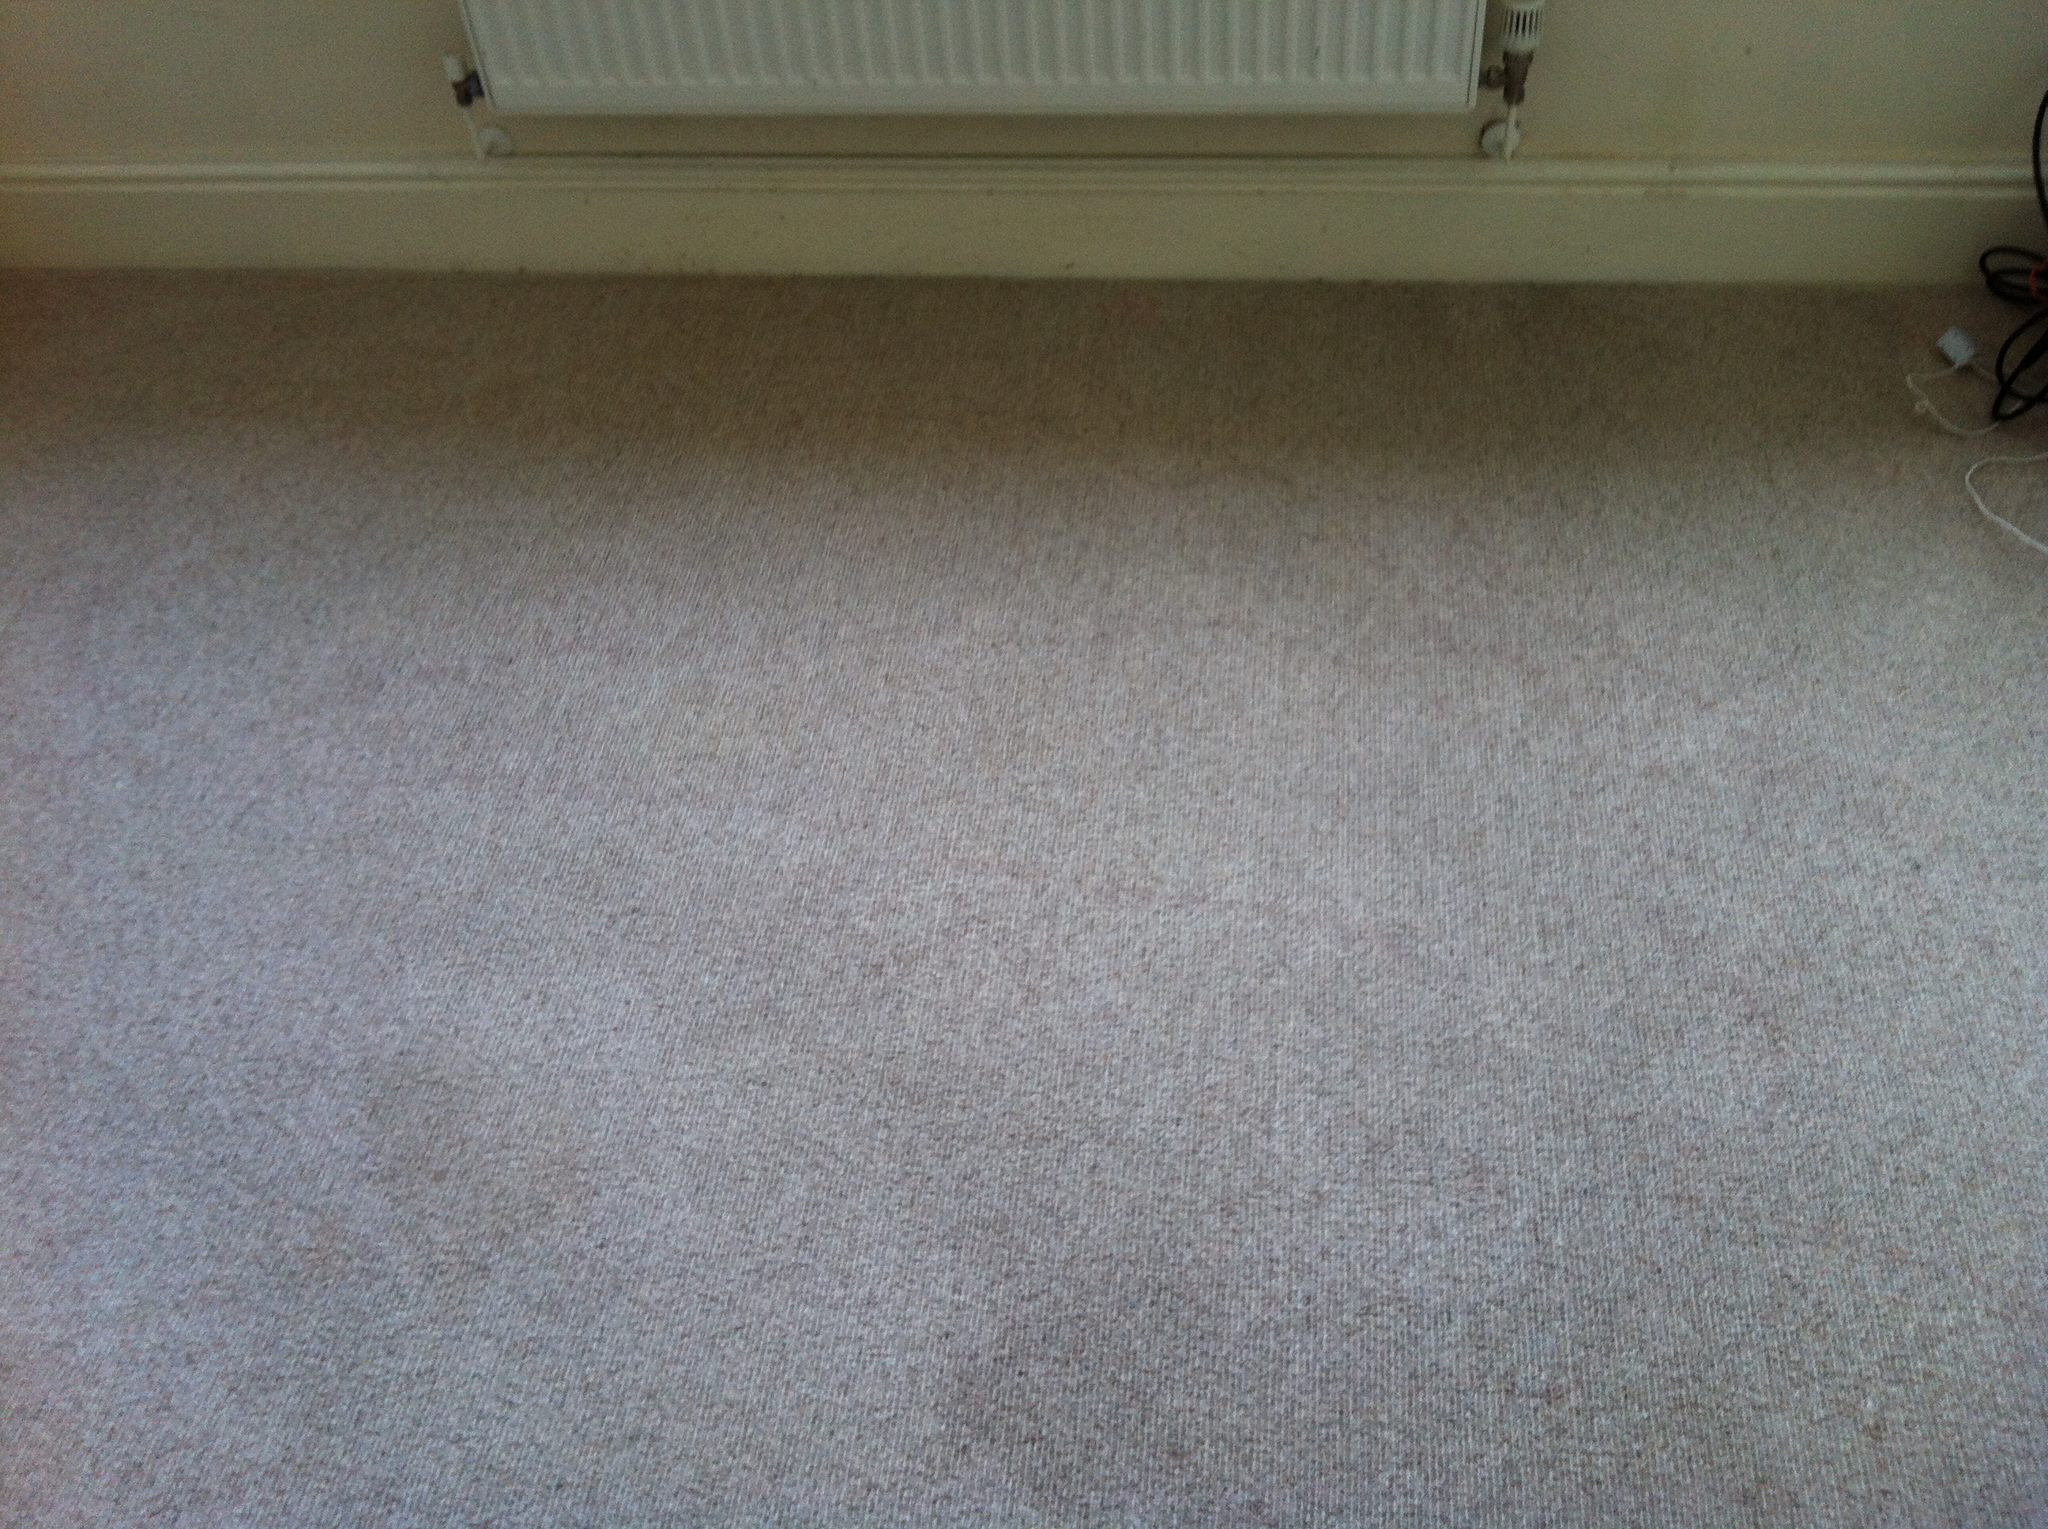 Carpet After Black Mold and Cleaning